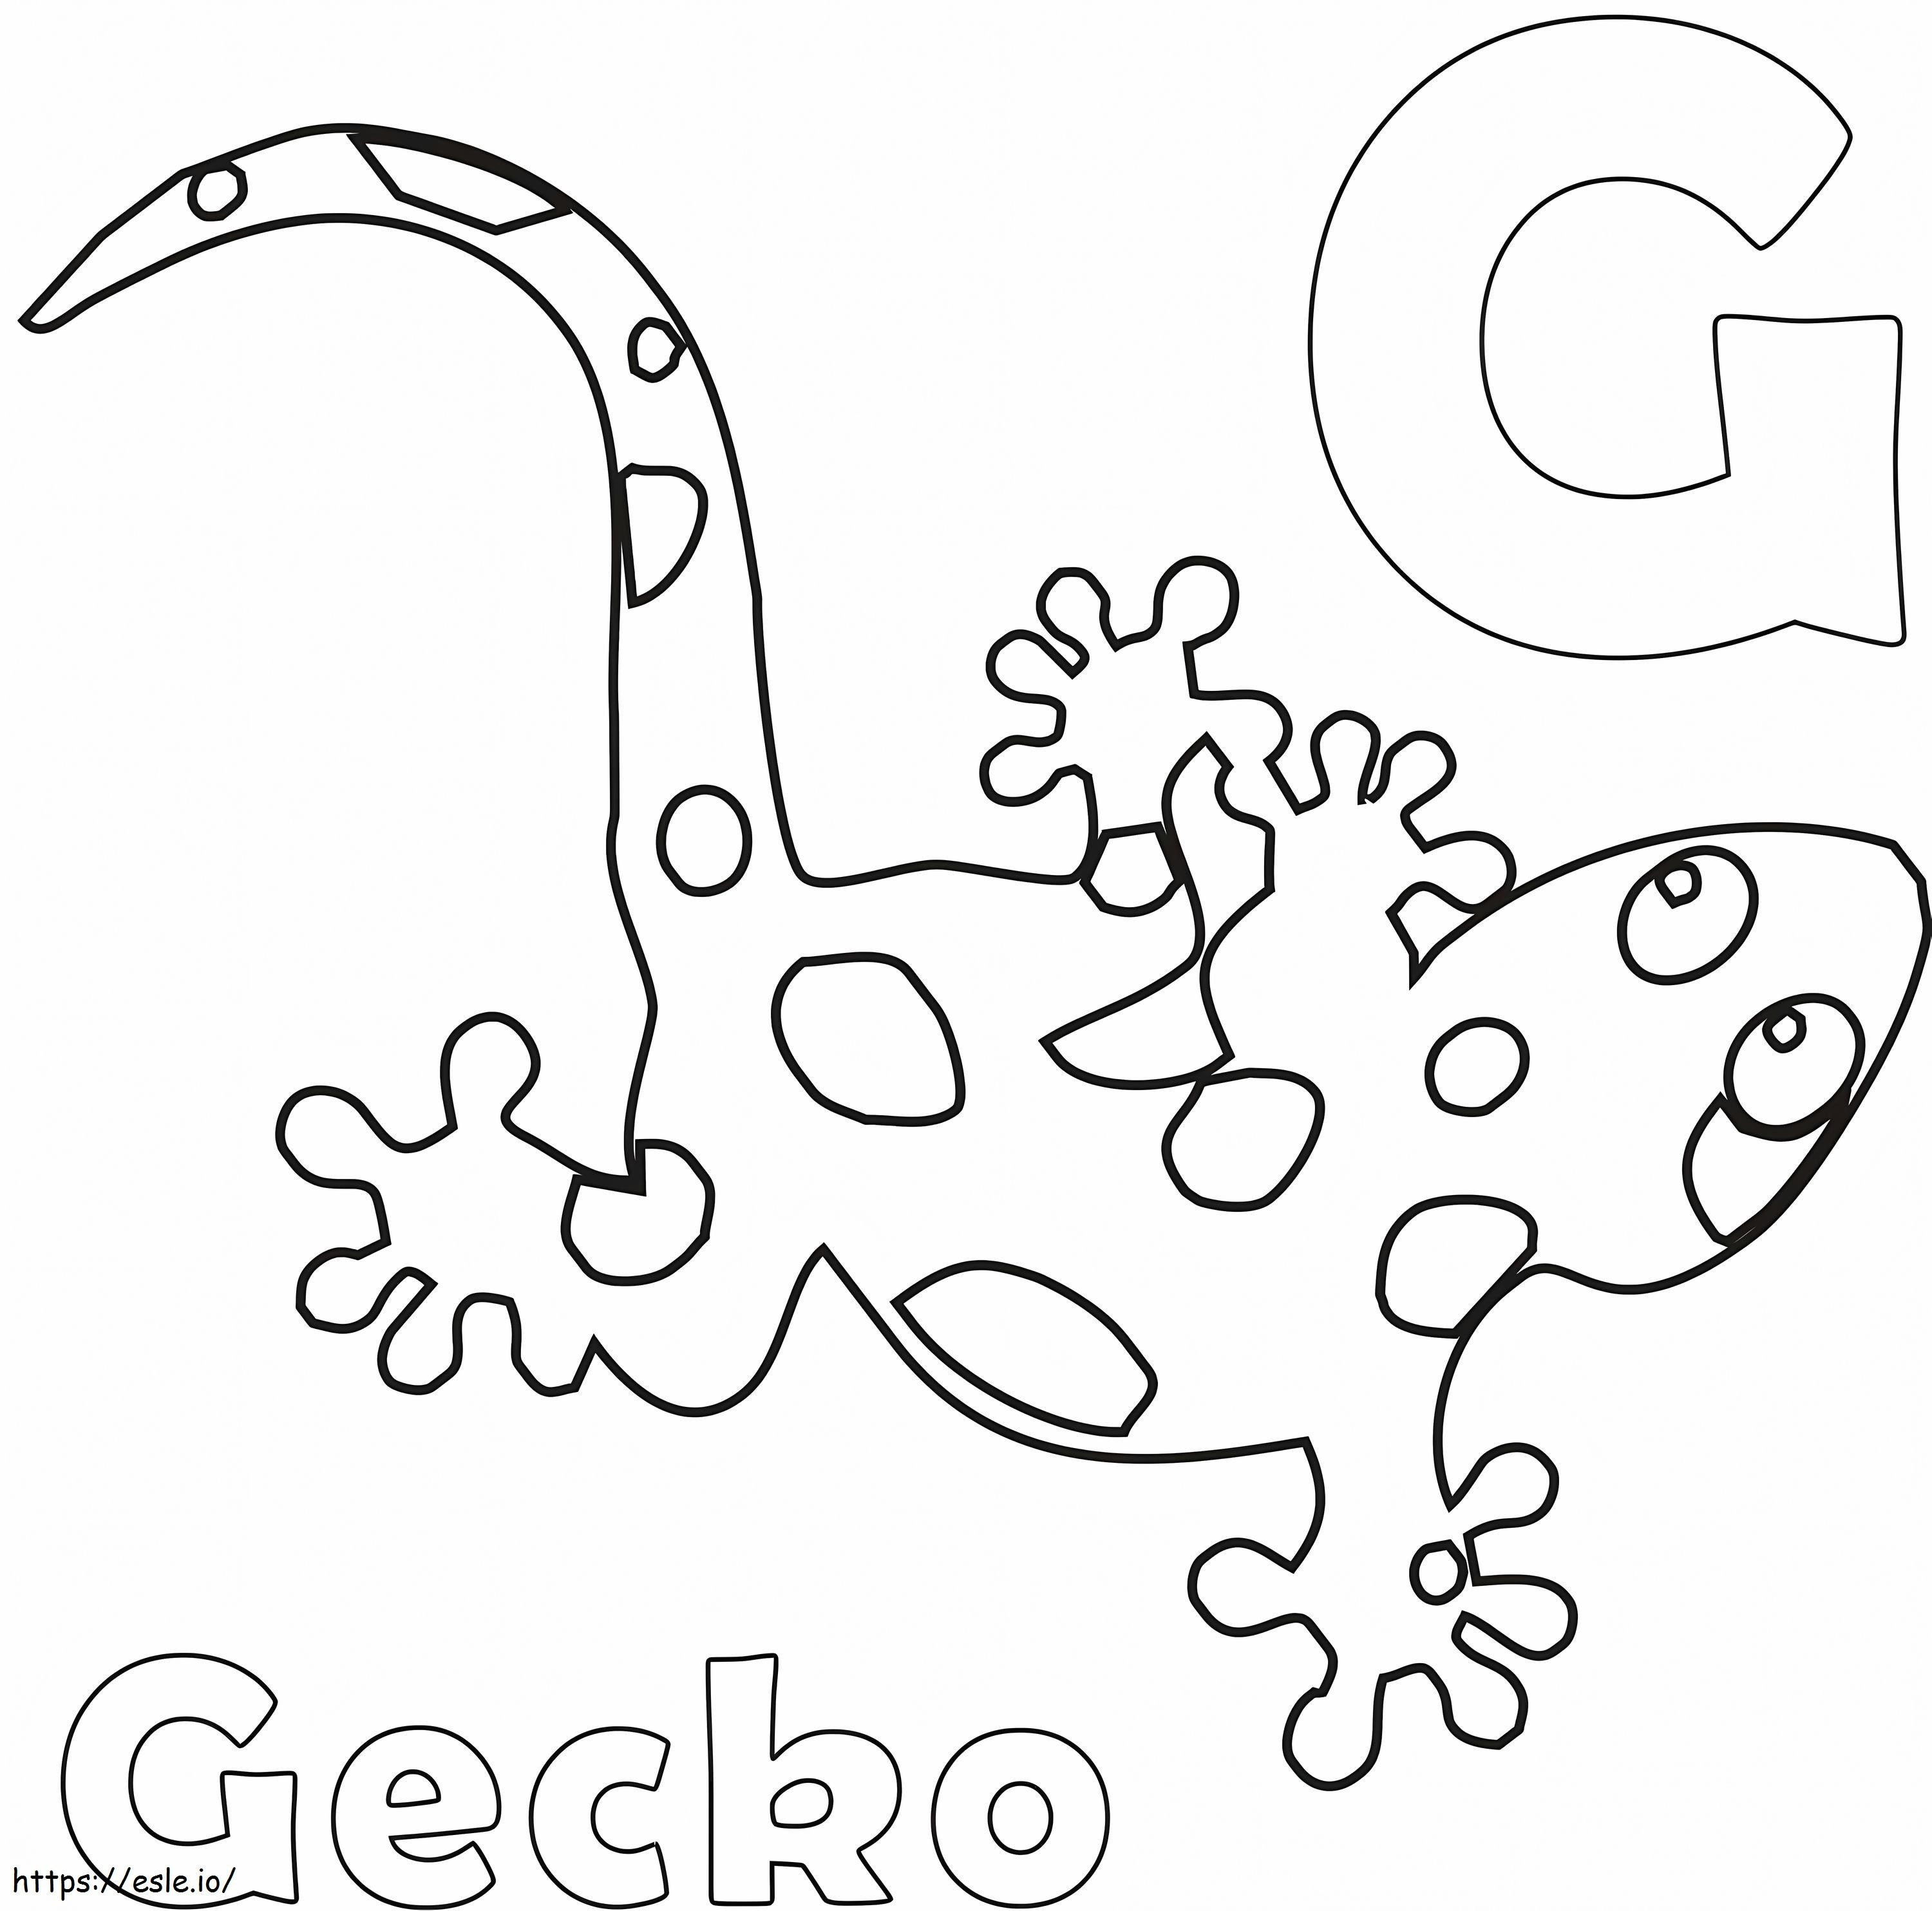 Letter G And Gecko coloring page